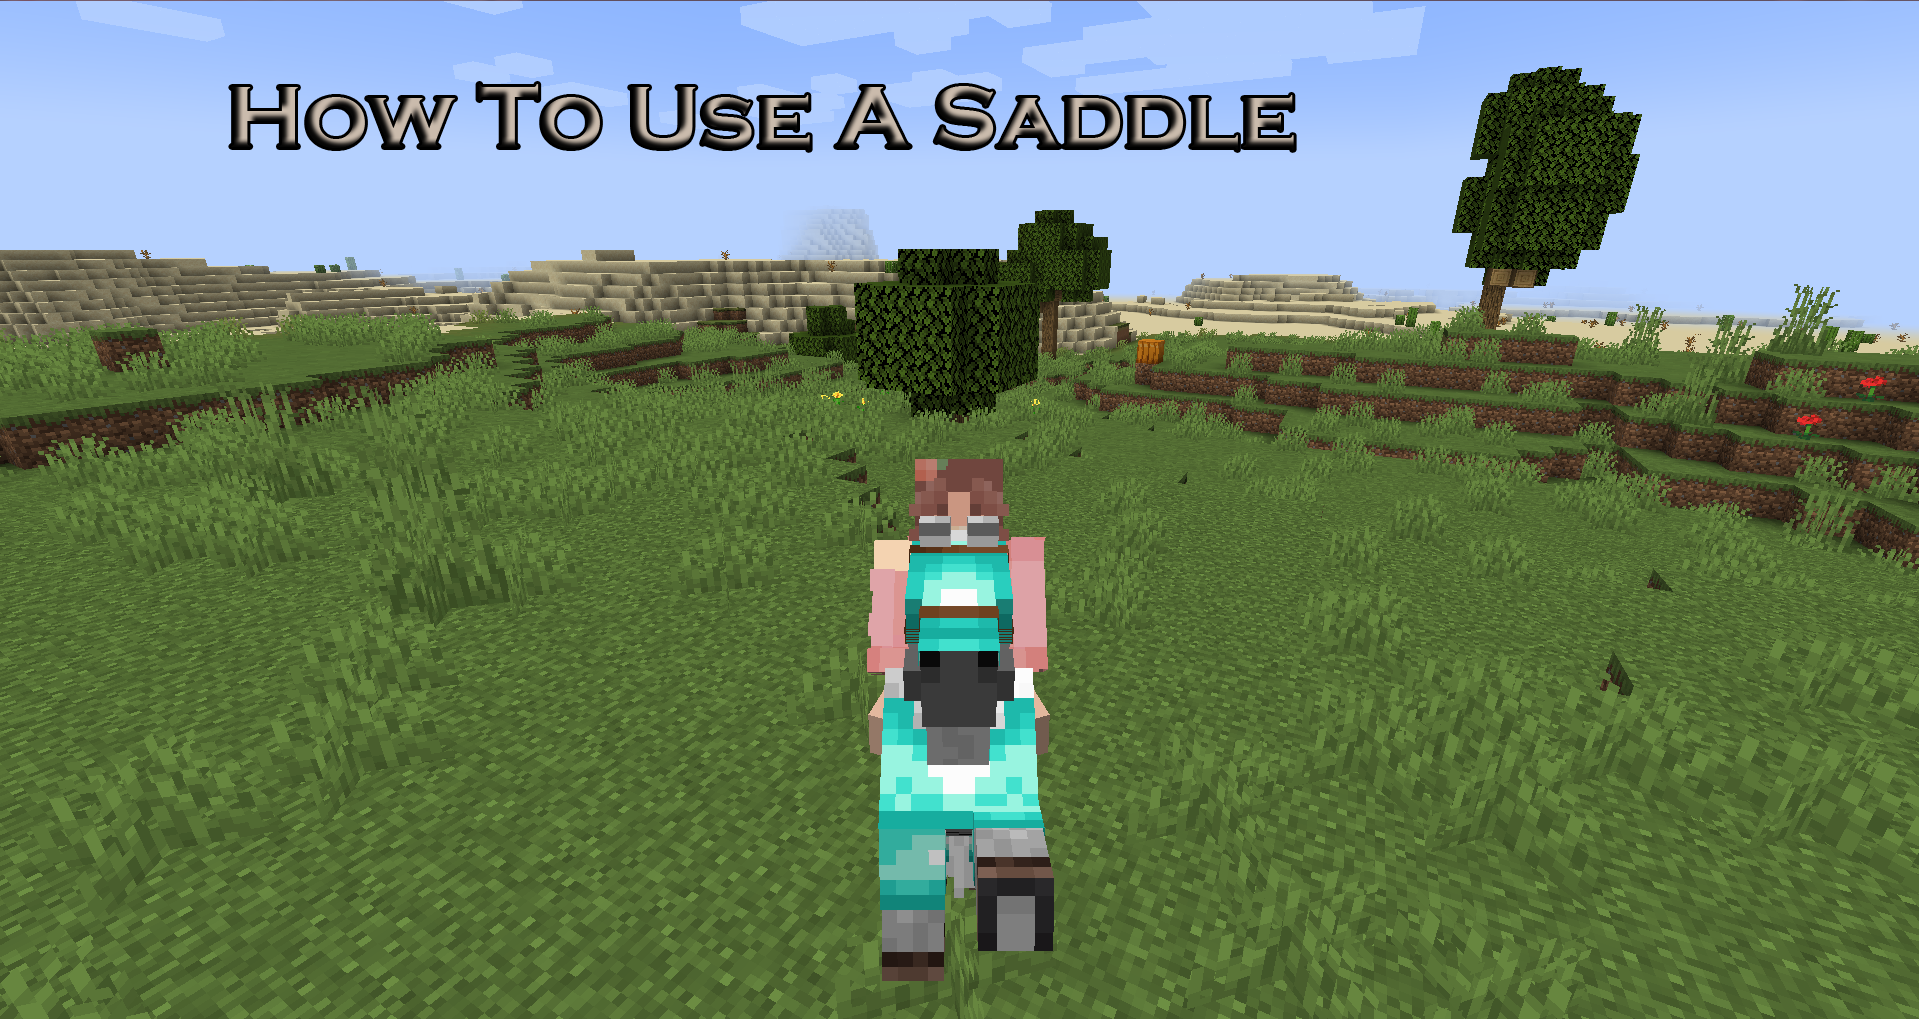 How To Use A Saddle in Minecraft